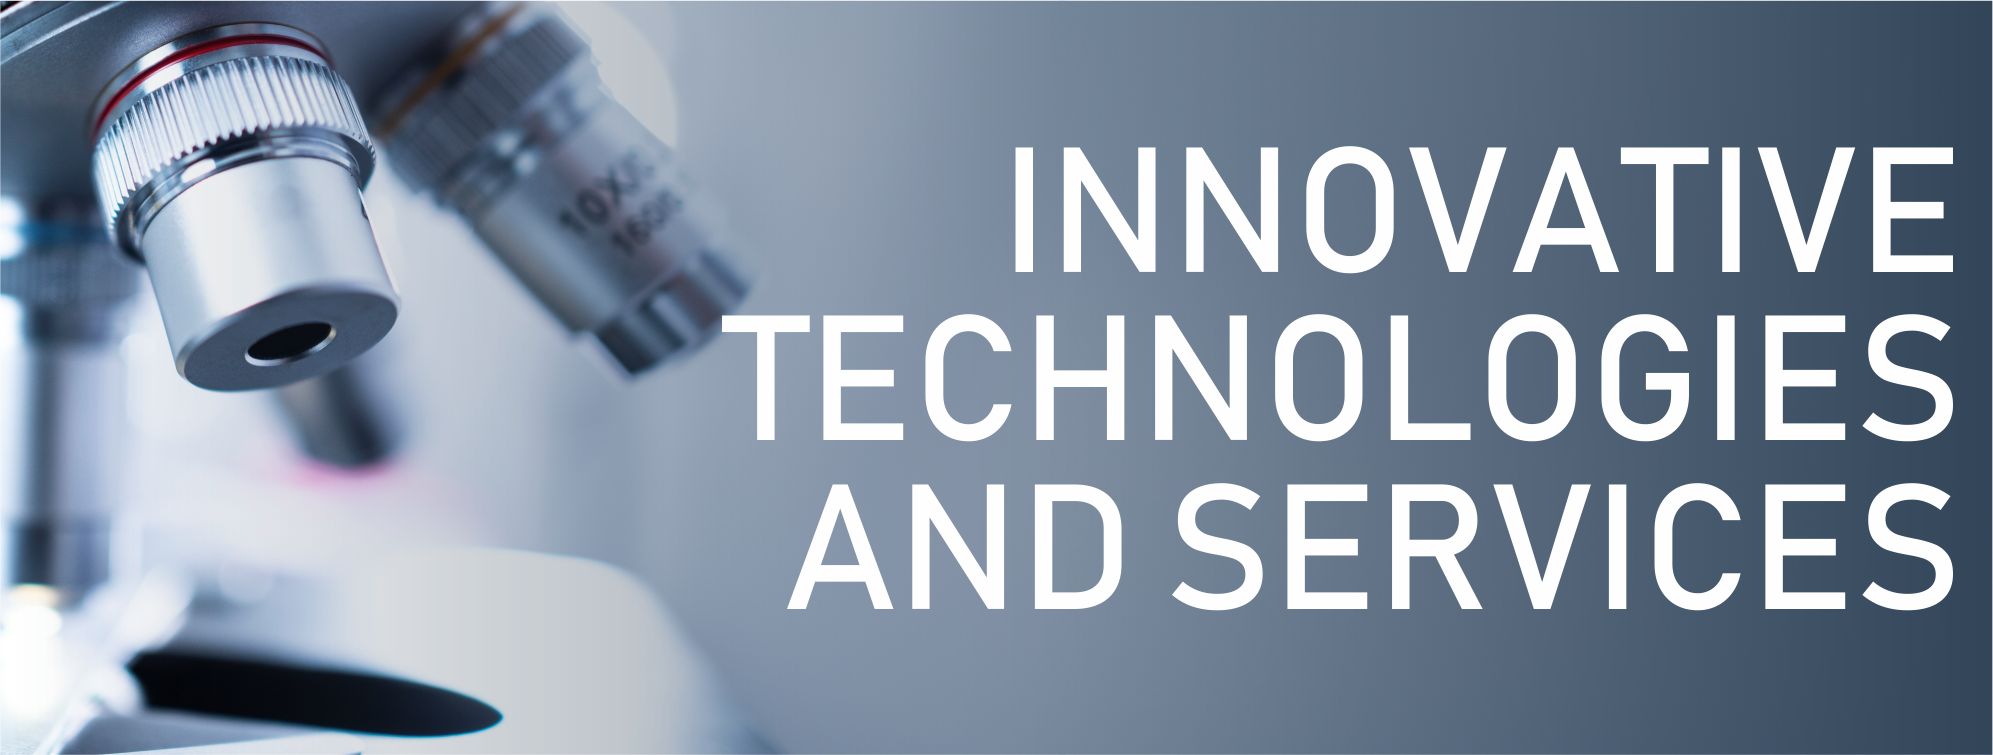 Innovative Technologies and Services